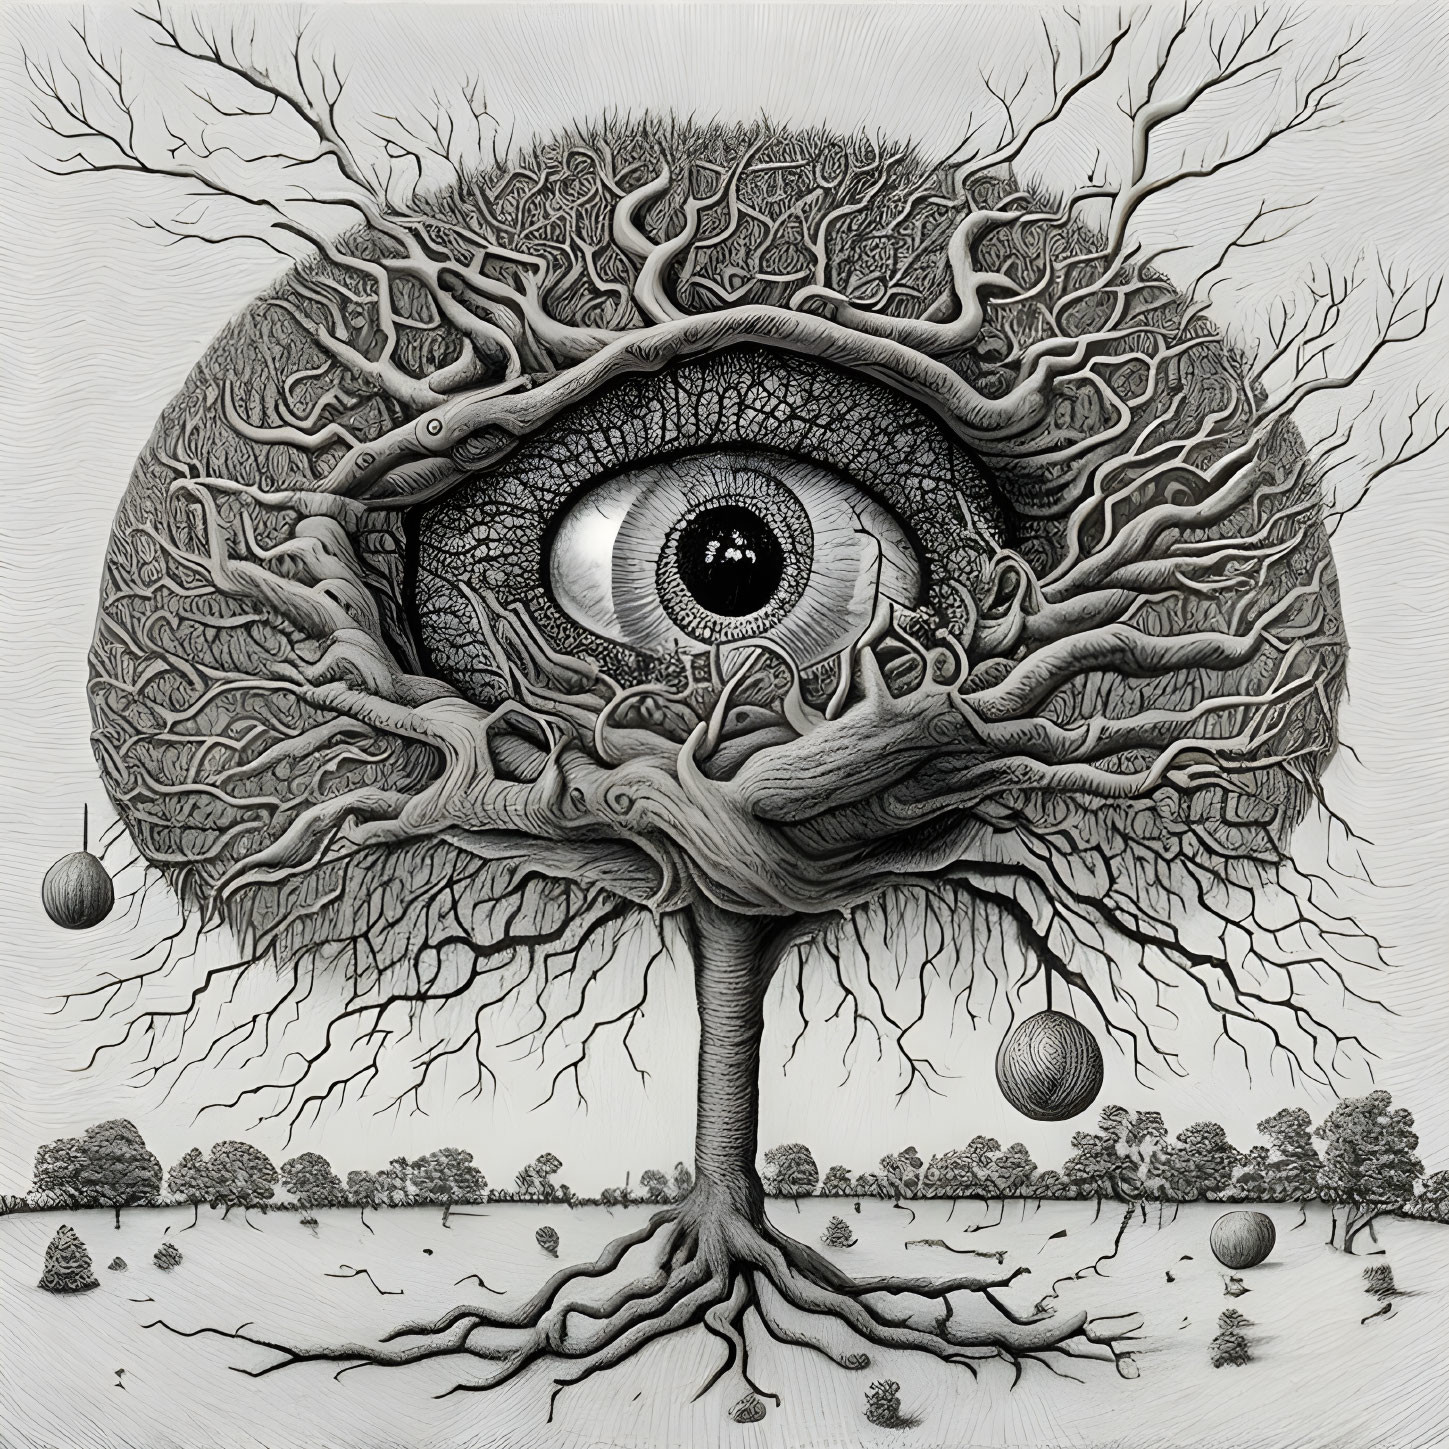 Surreal black and white tree blending into an eye illustration with intricate branches and hanging orbs